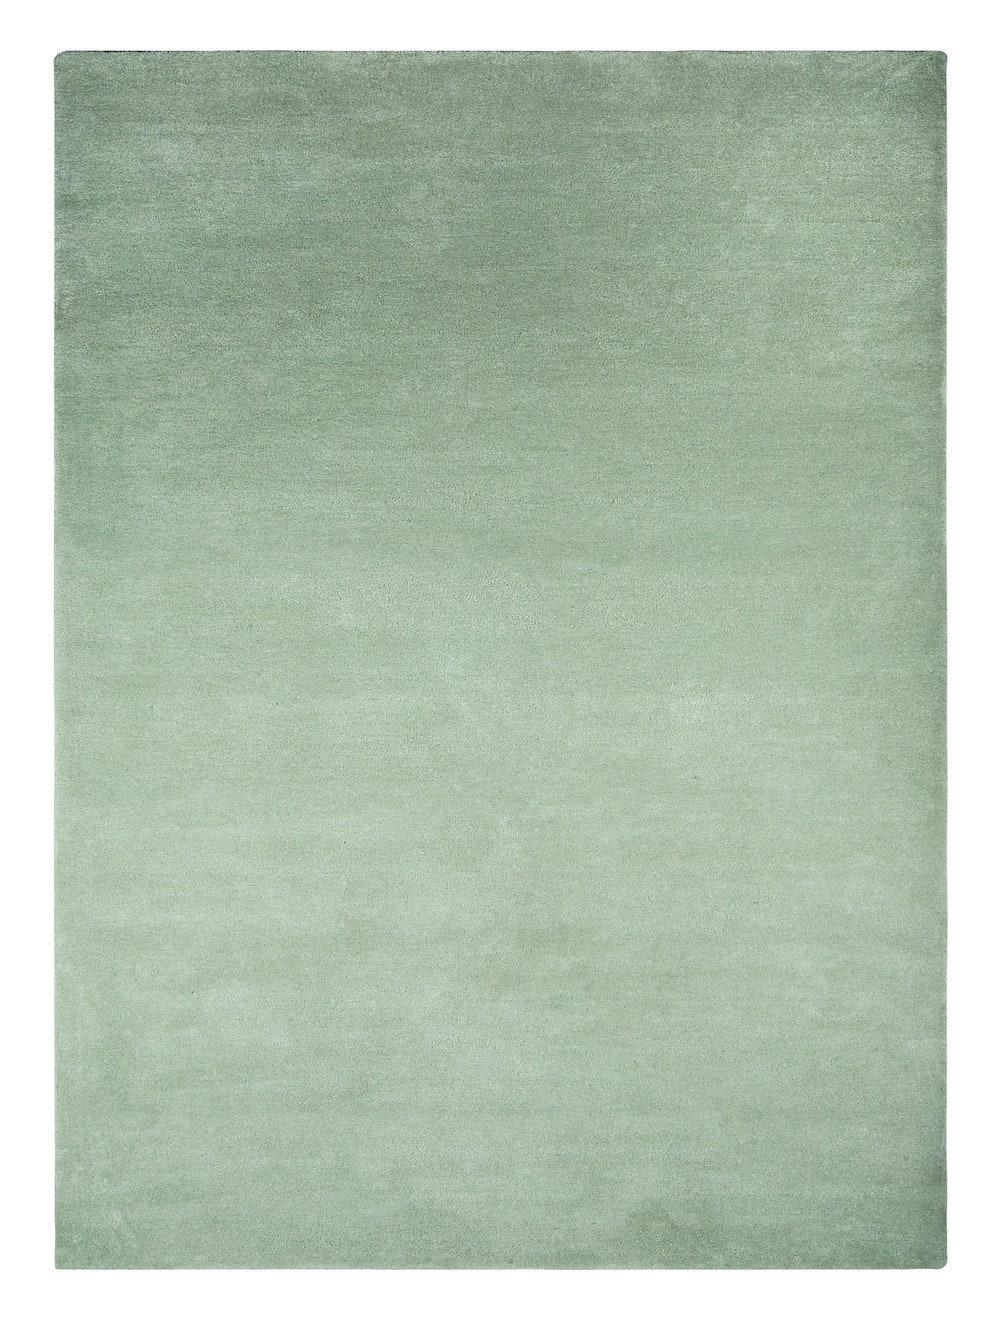 Pistachio RePeat carpet by Massimo Copenhagen
Handtufted
Materials: 100% recycled Pet, cotton.
Dimensions: W 250 x H 350 cm
Available colors: Graphite, cream, beige, pistachio, and pastel yellow. 
Other dimensions are available: 160 x 230 cm,